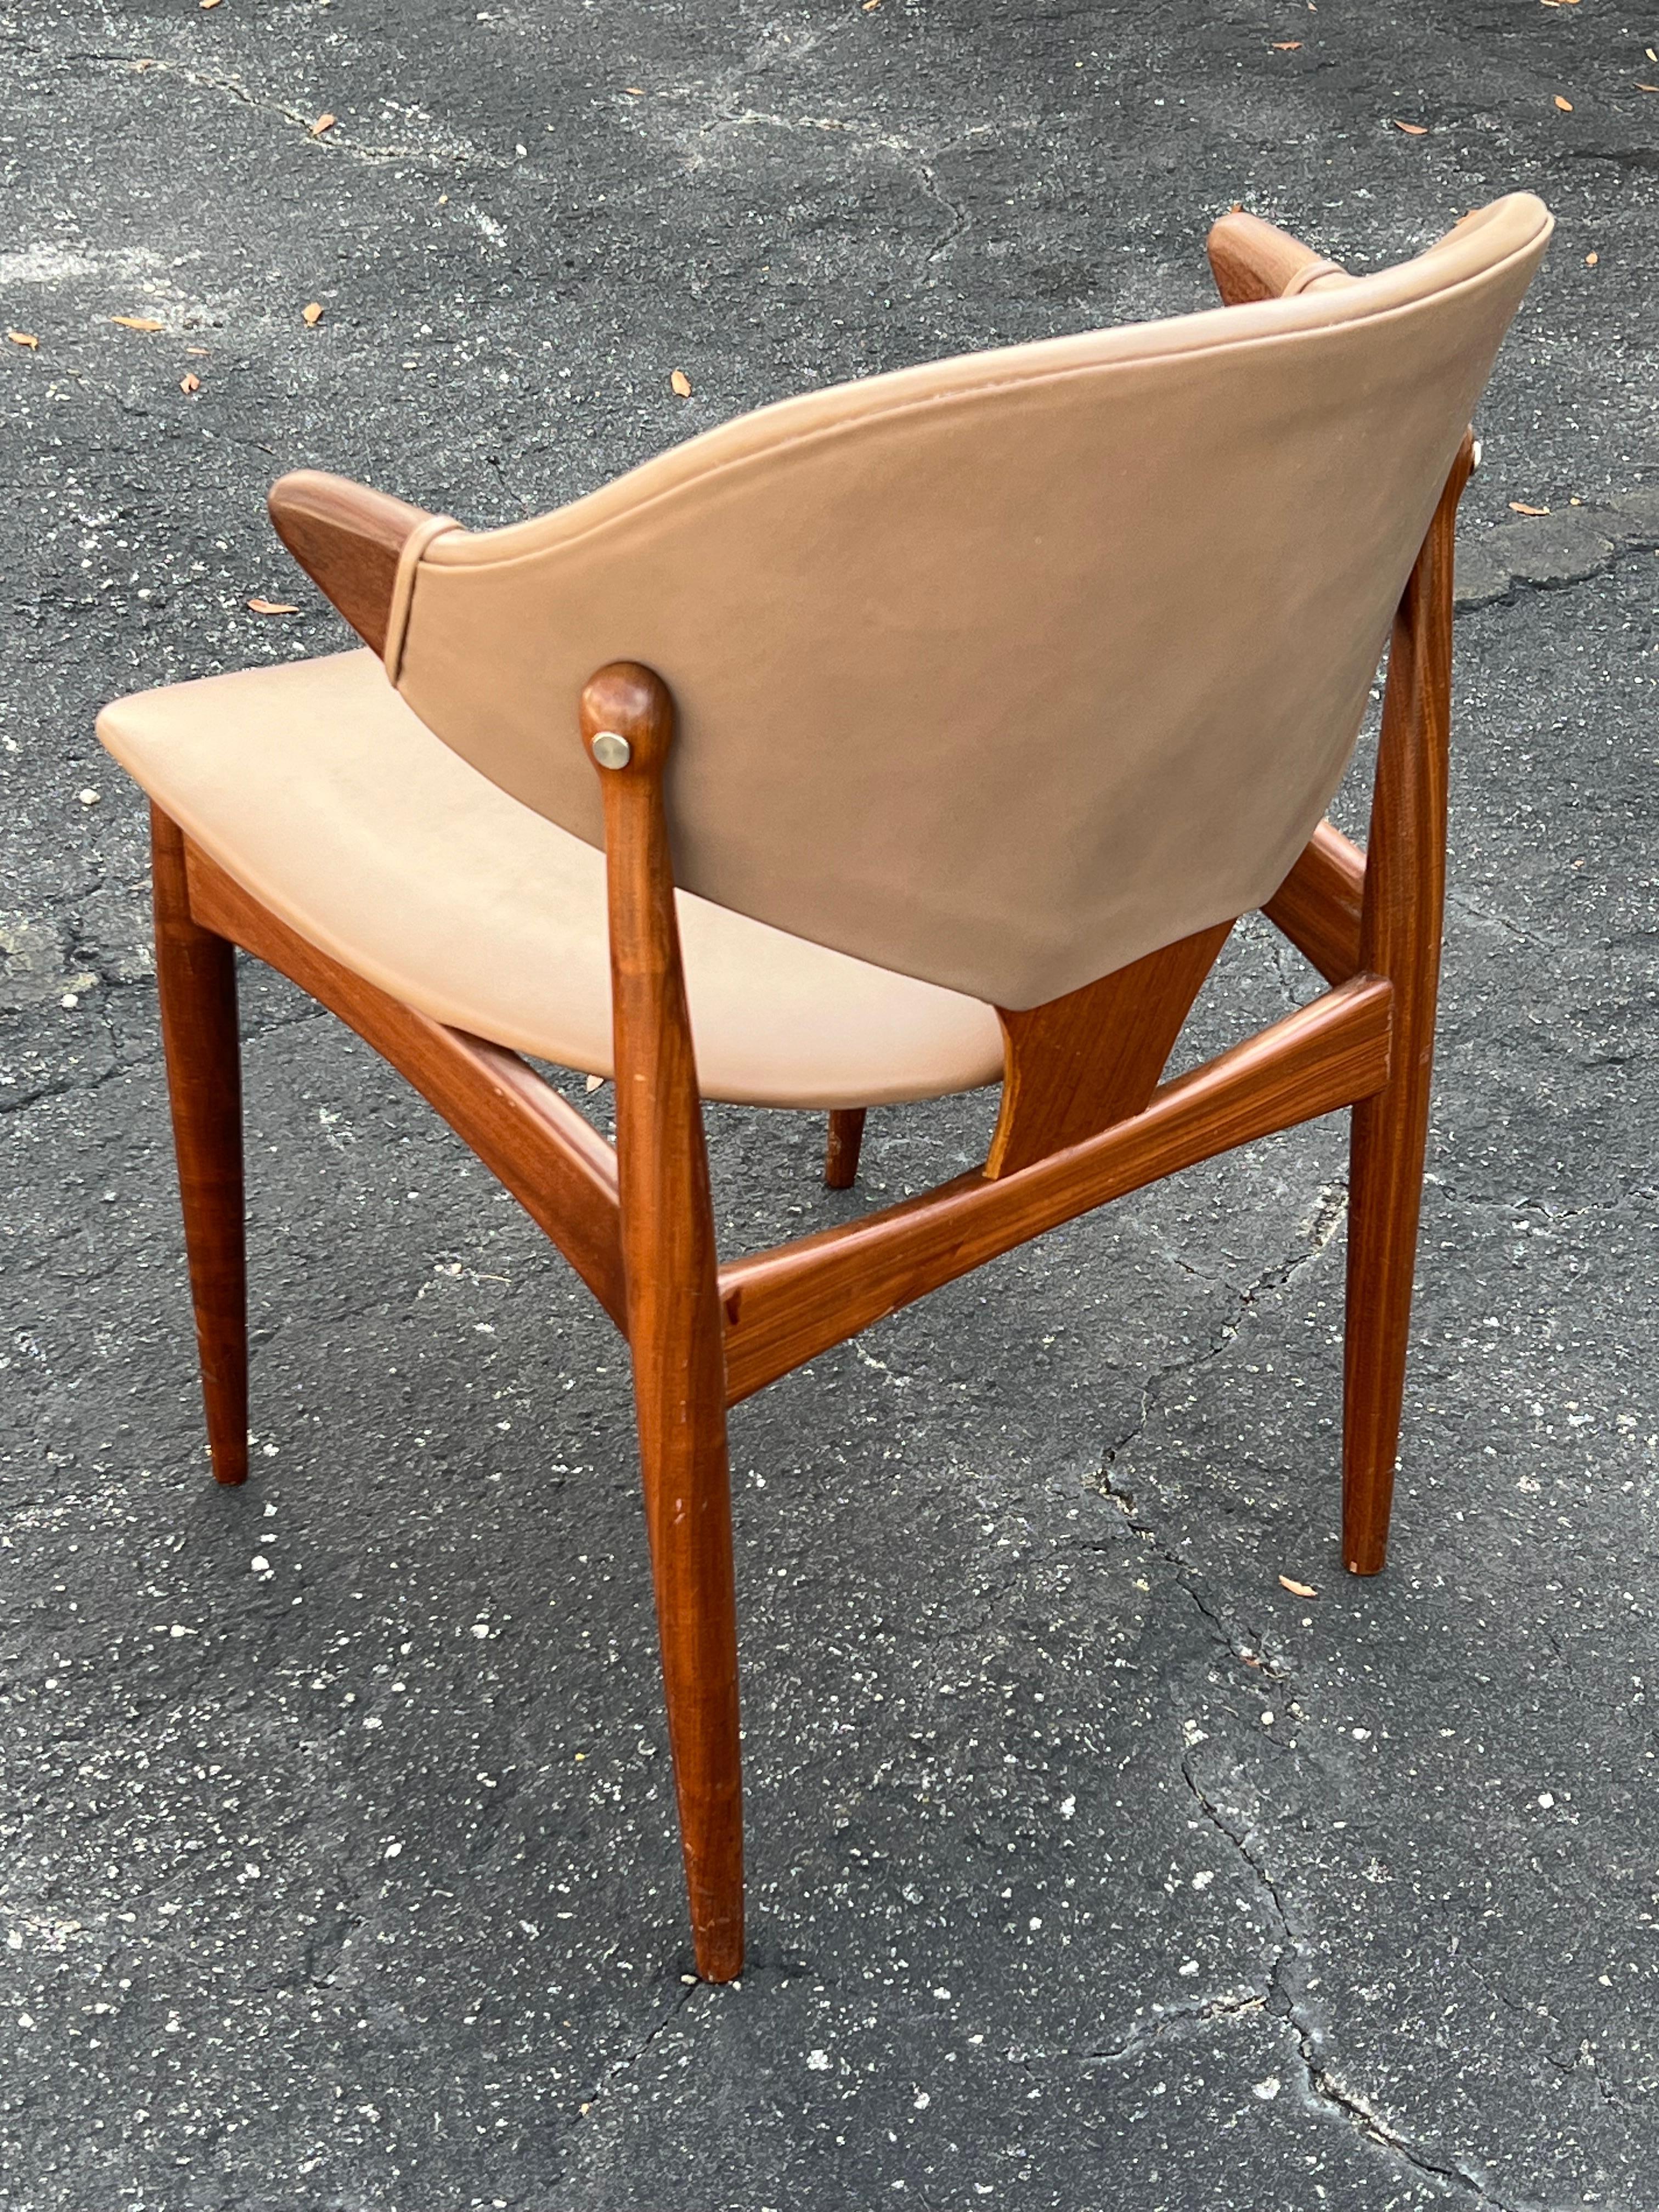 Mid-20th Century Classic Arne Vodder Leather And Teak Chair For Mahjongg Holland 1964 For Sale